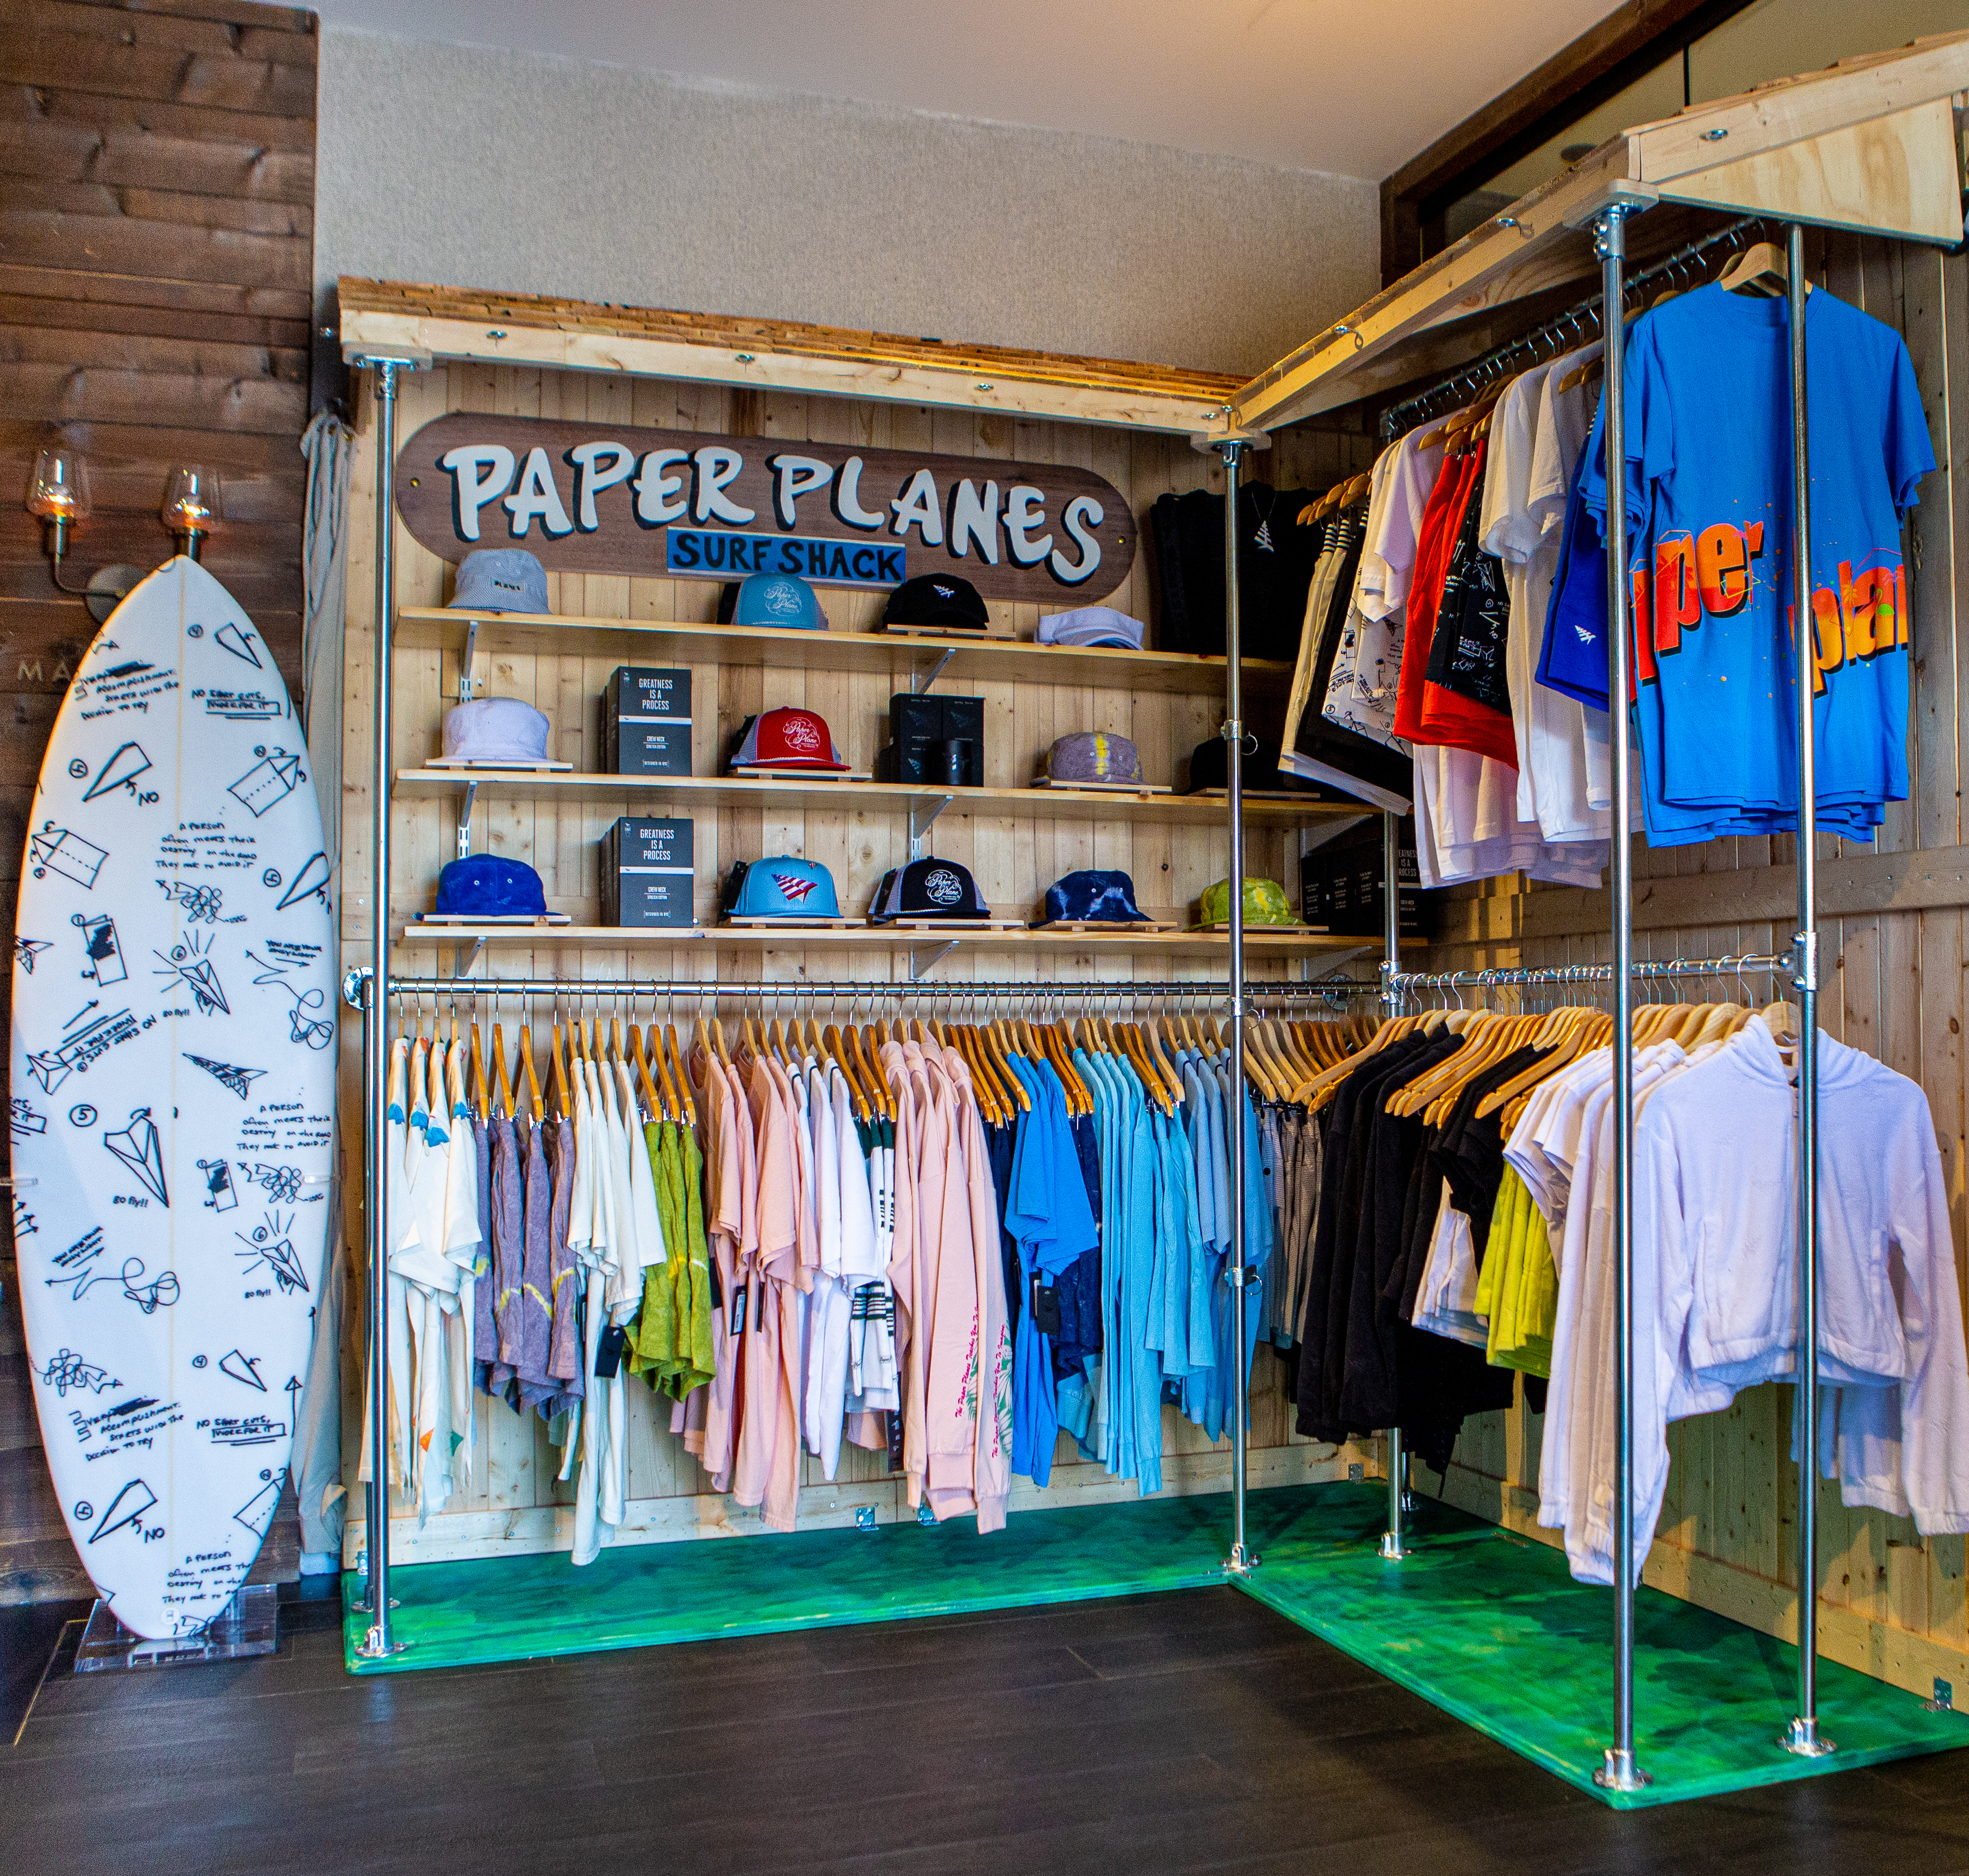 Clothing Items Hang on Racks at The Paper Planes Retail Pop-Up Shop